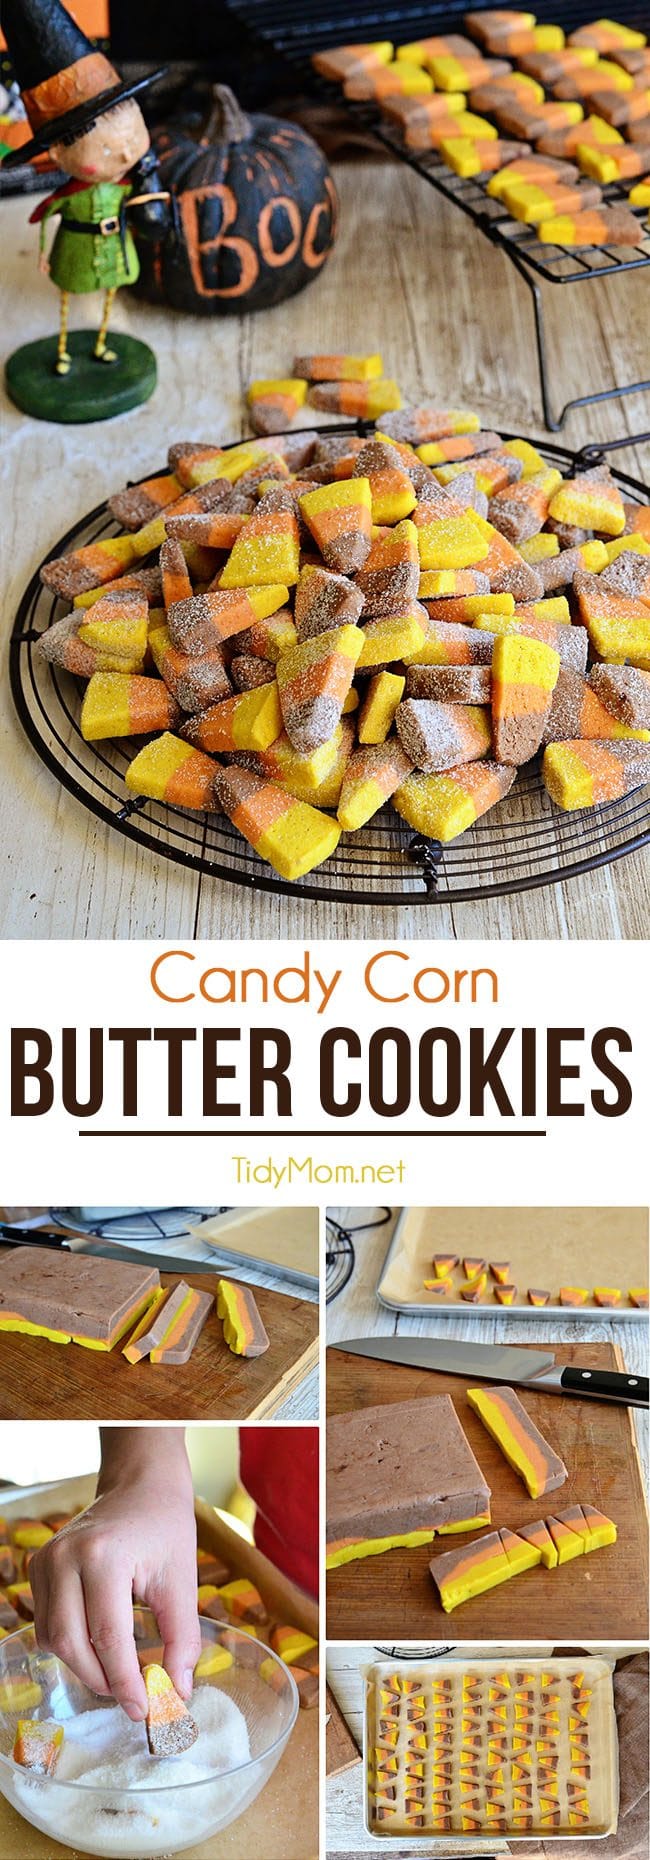 Candy Corn Cookies